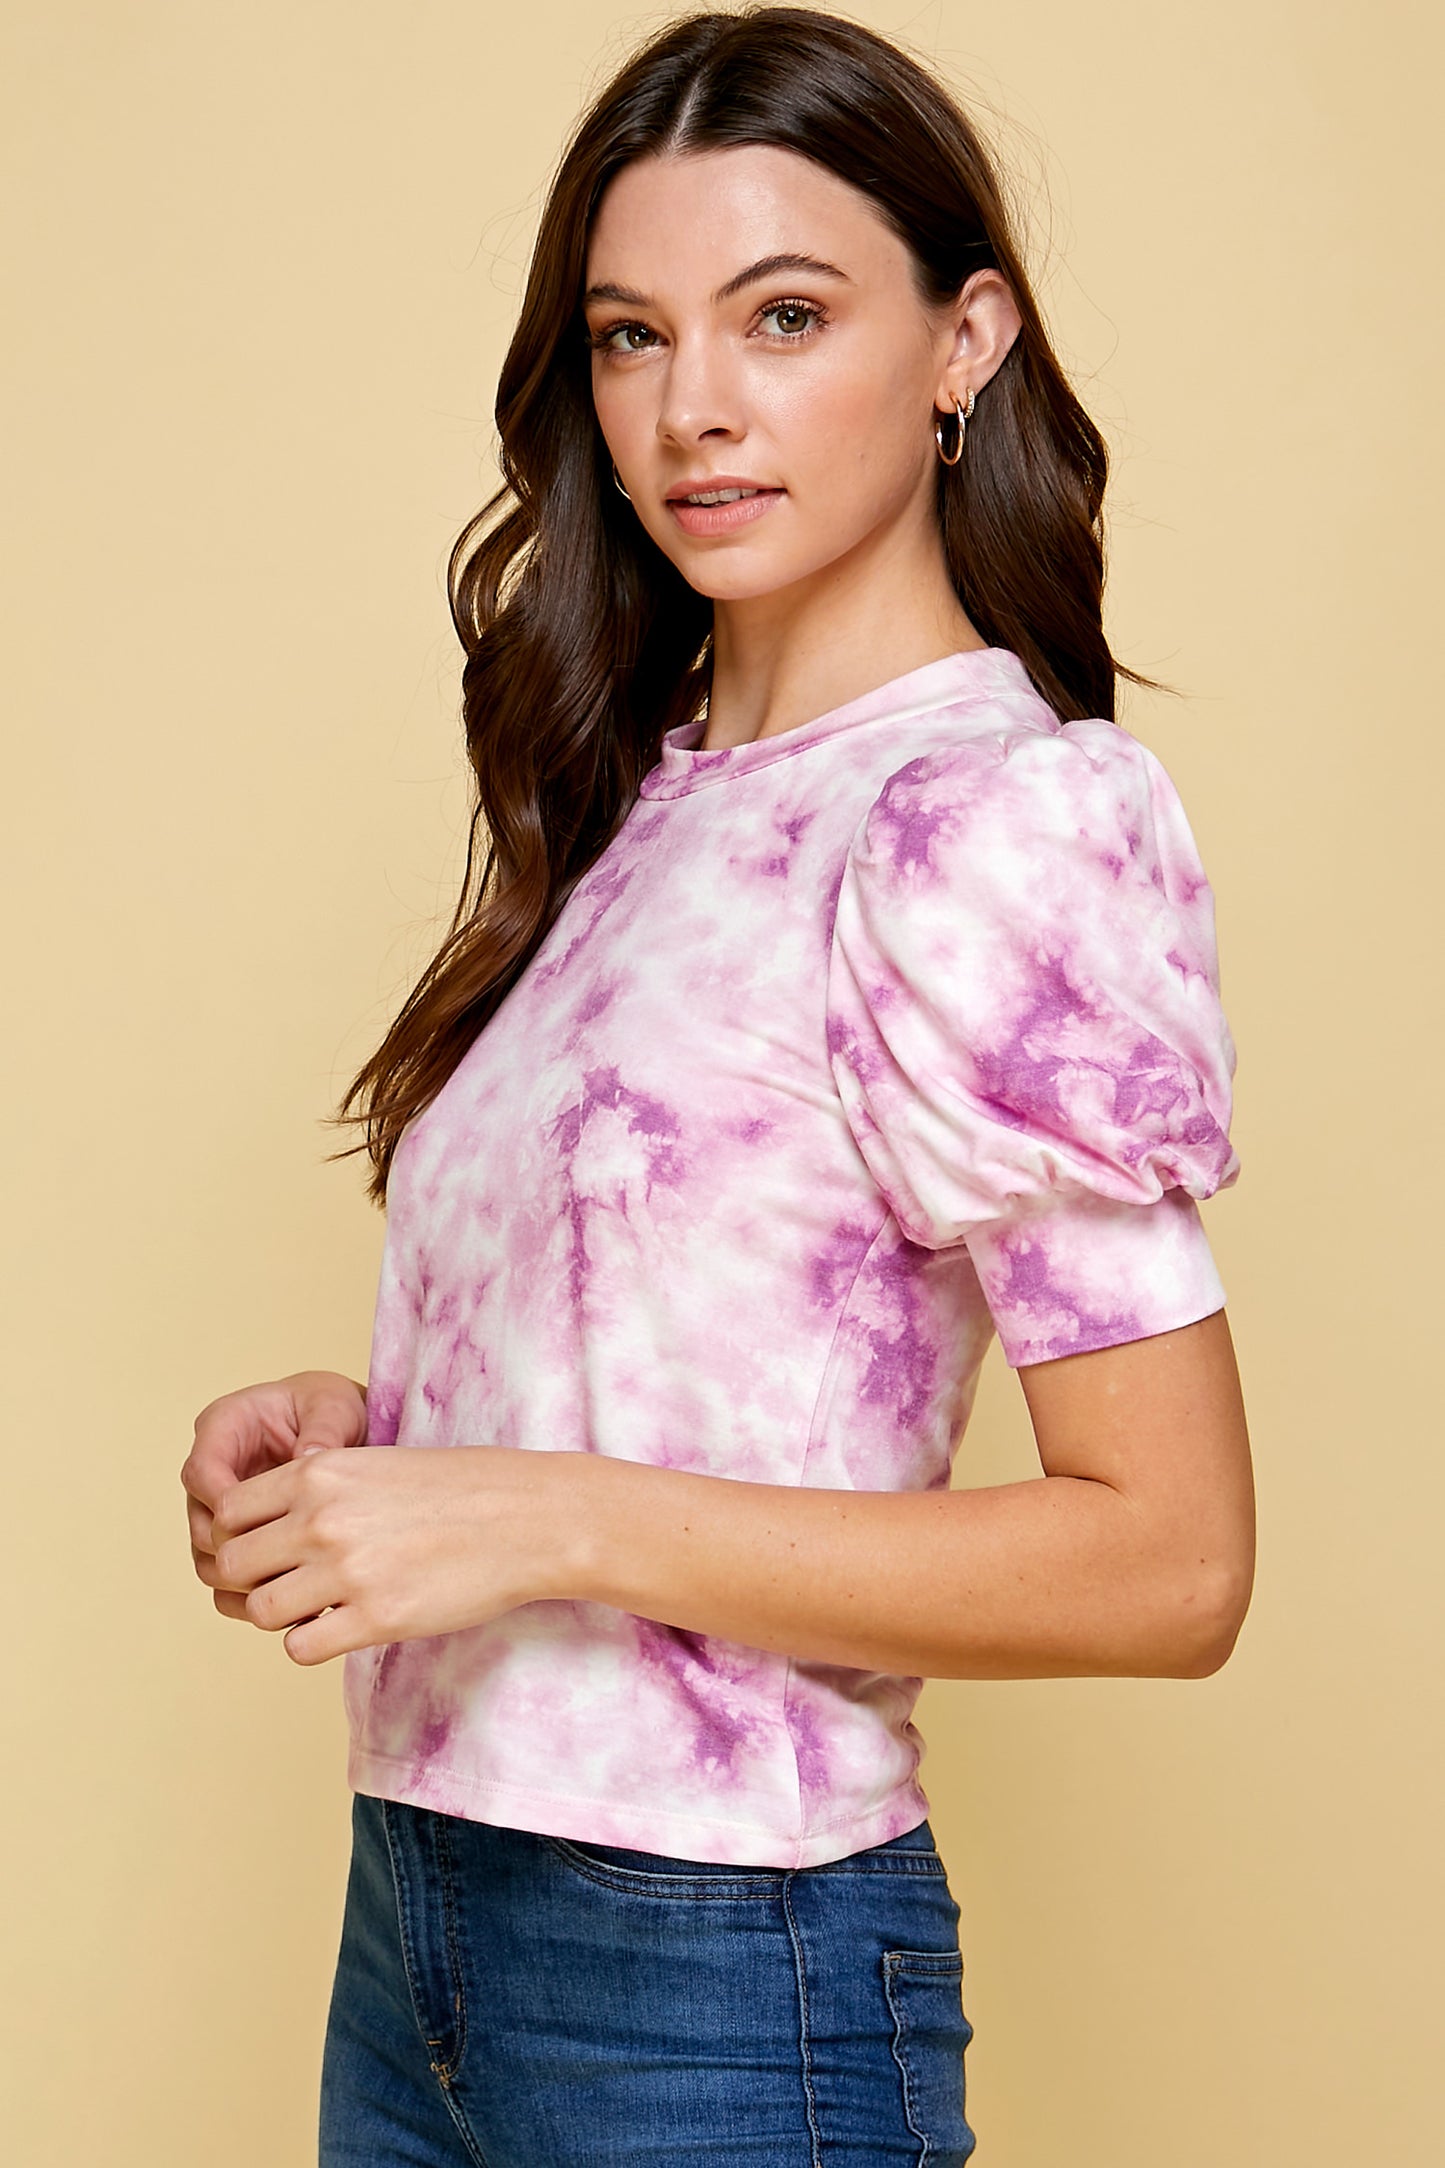 PINK TIE DYE SHIRT WITH PUFFED SLEEVE